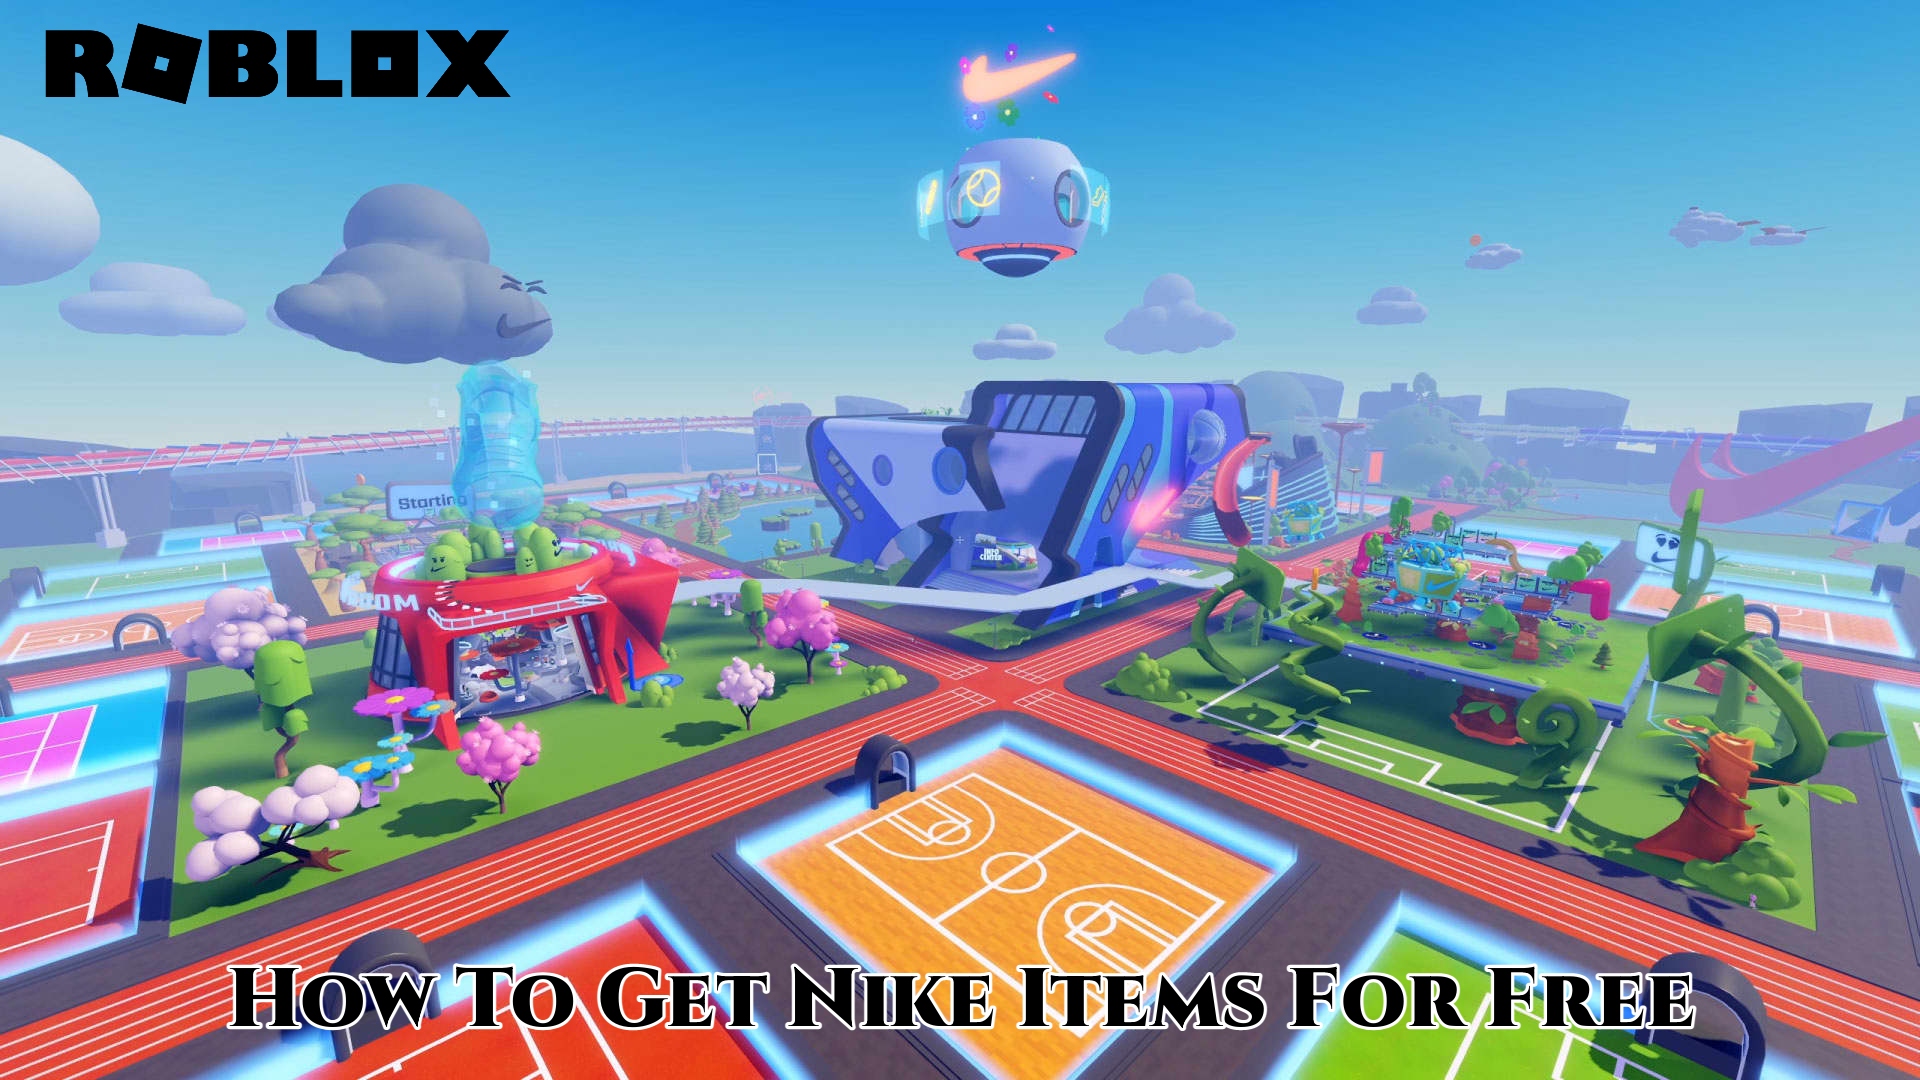 How To Get Nike Items For Free In Roblox